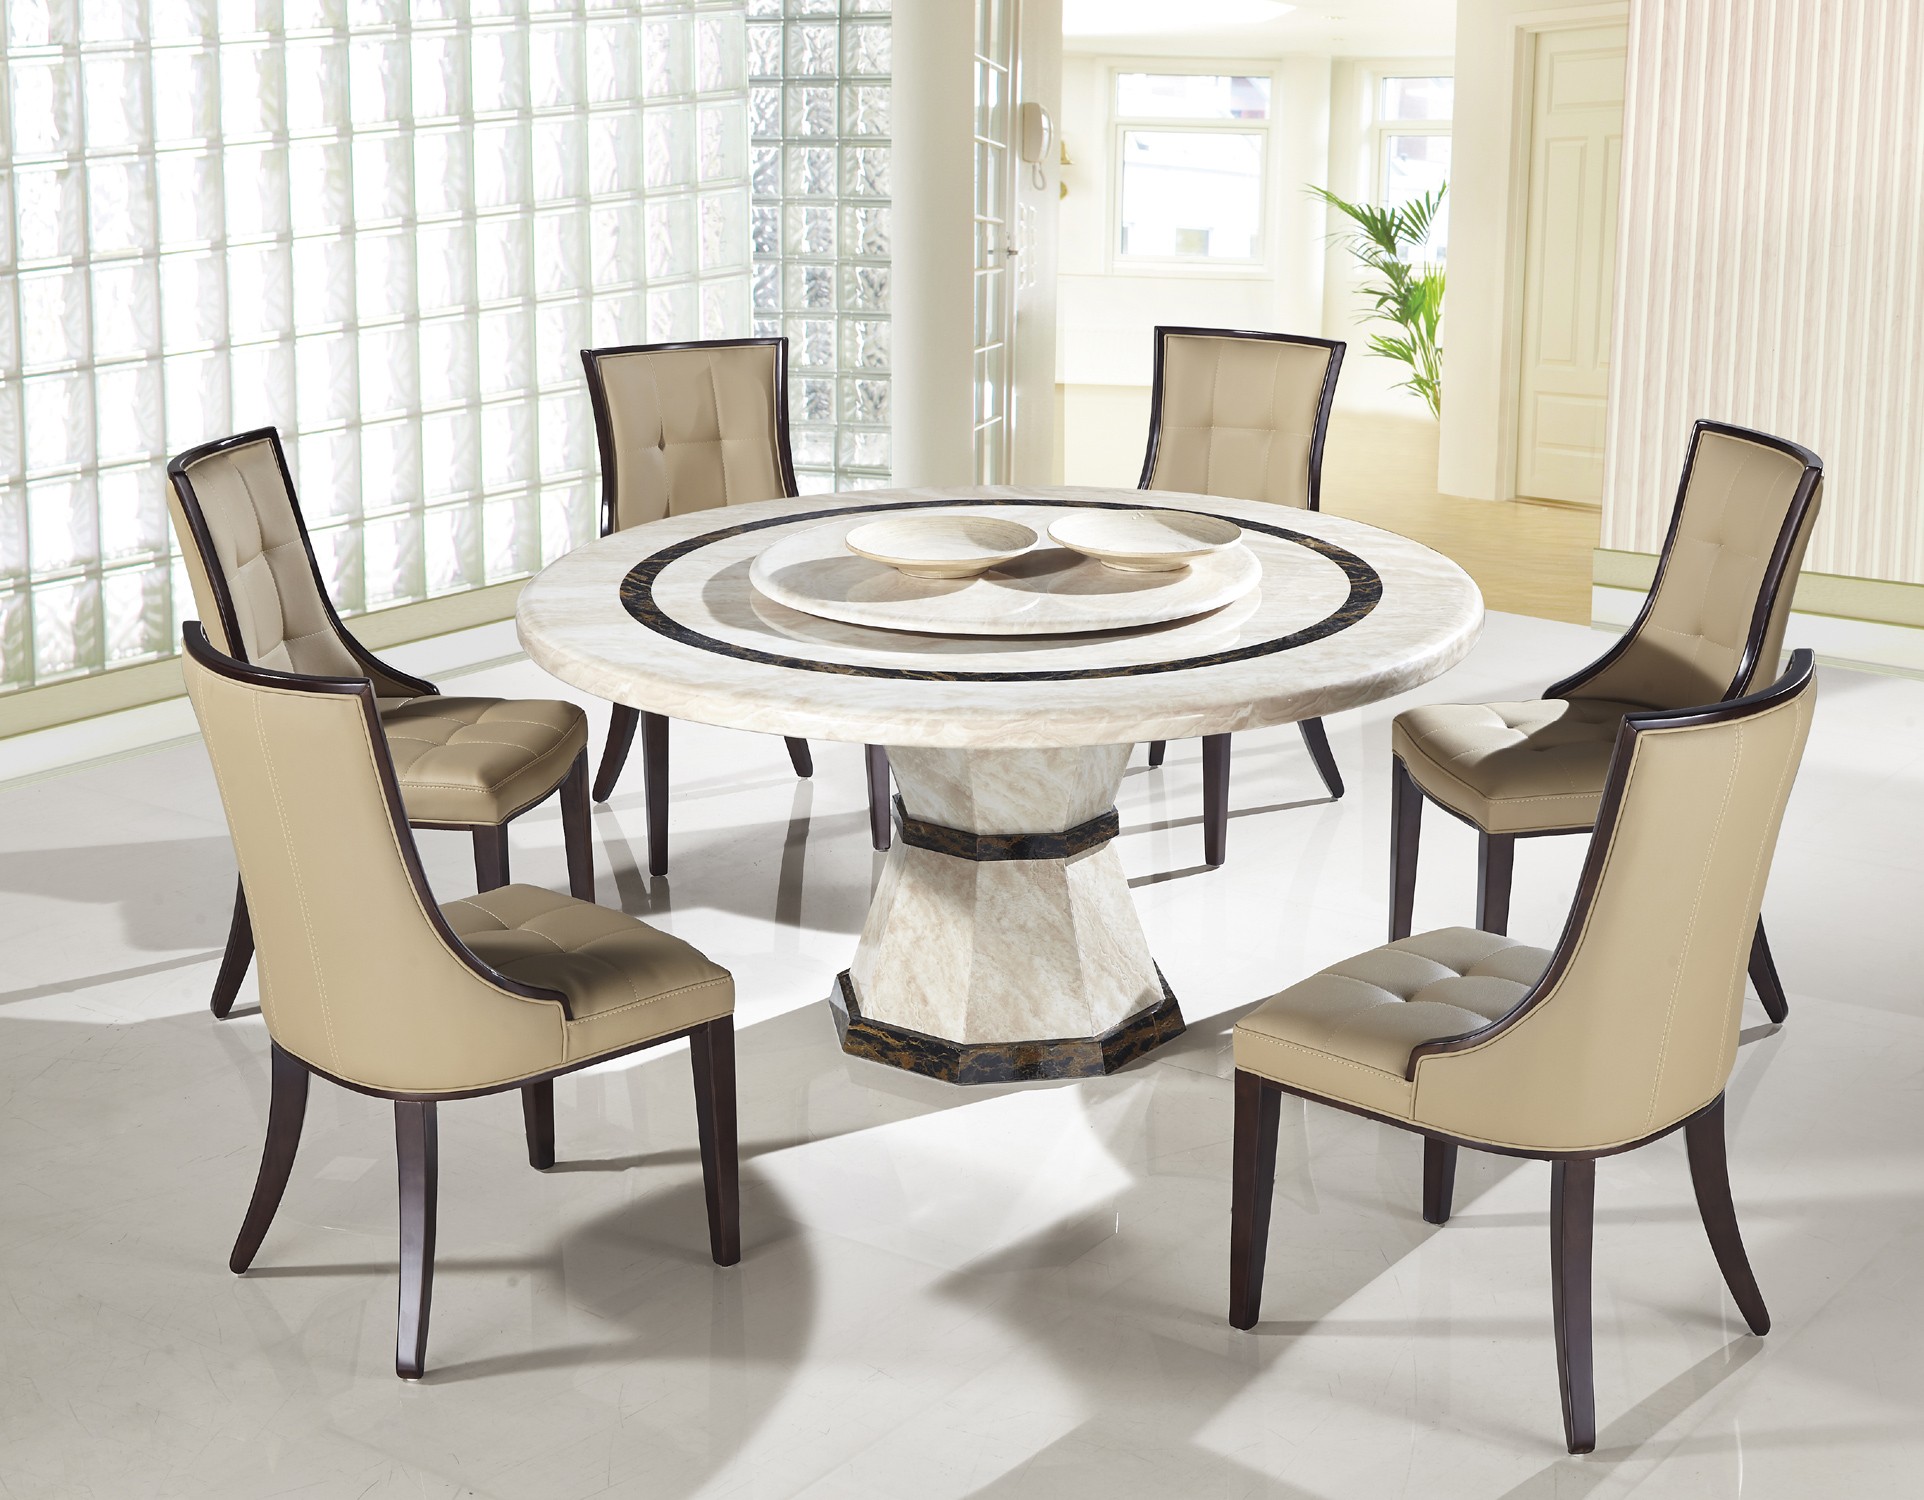 Modern Dining Room With Round Table